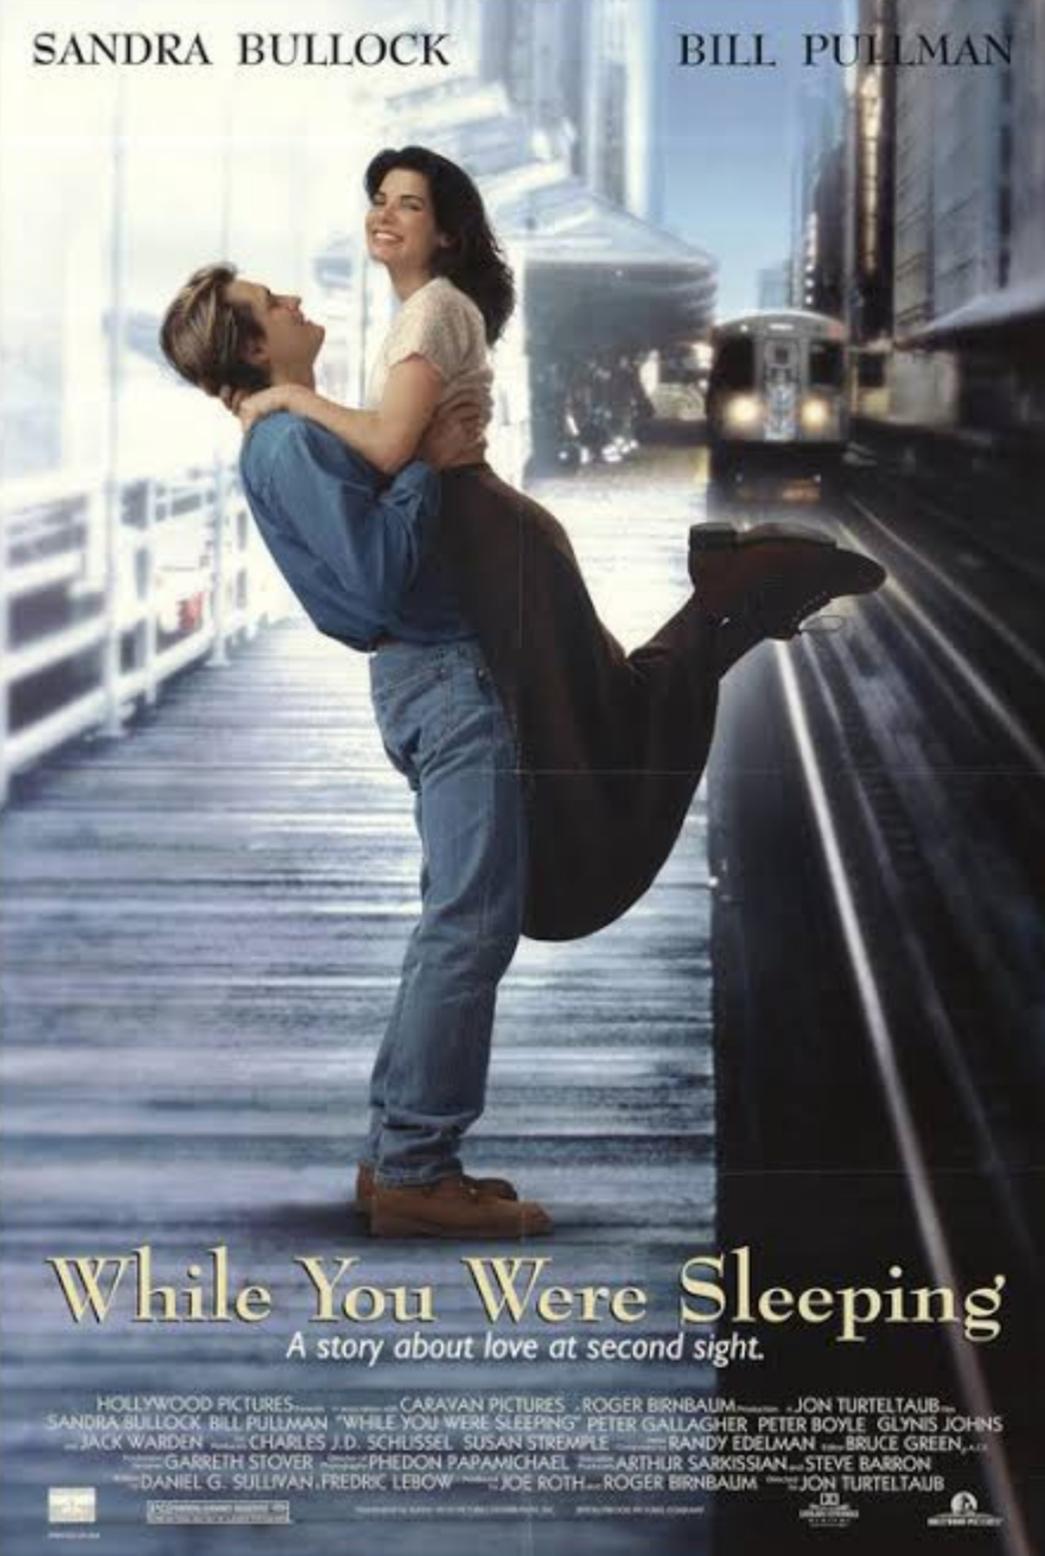 While You Were Sleeping: Is it a Christmas movie or a movie set during Christmas? Sandra Bullock's Lucy rescues a man, leading to mistaken identity and romantic chaos in snowy Chicago. This '90s rom-com fueled the nation's fascination with Sandra Bullock and snowy love stories.